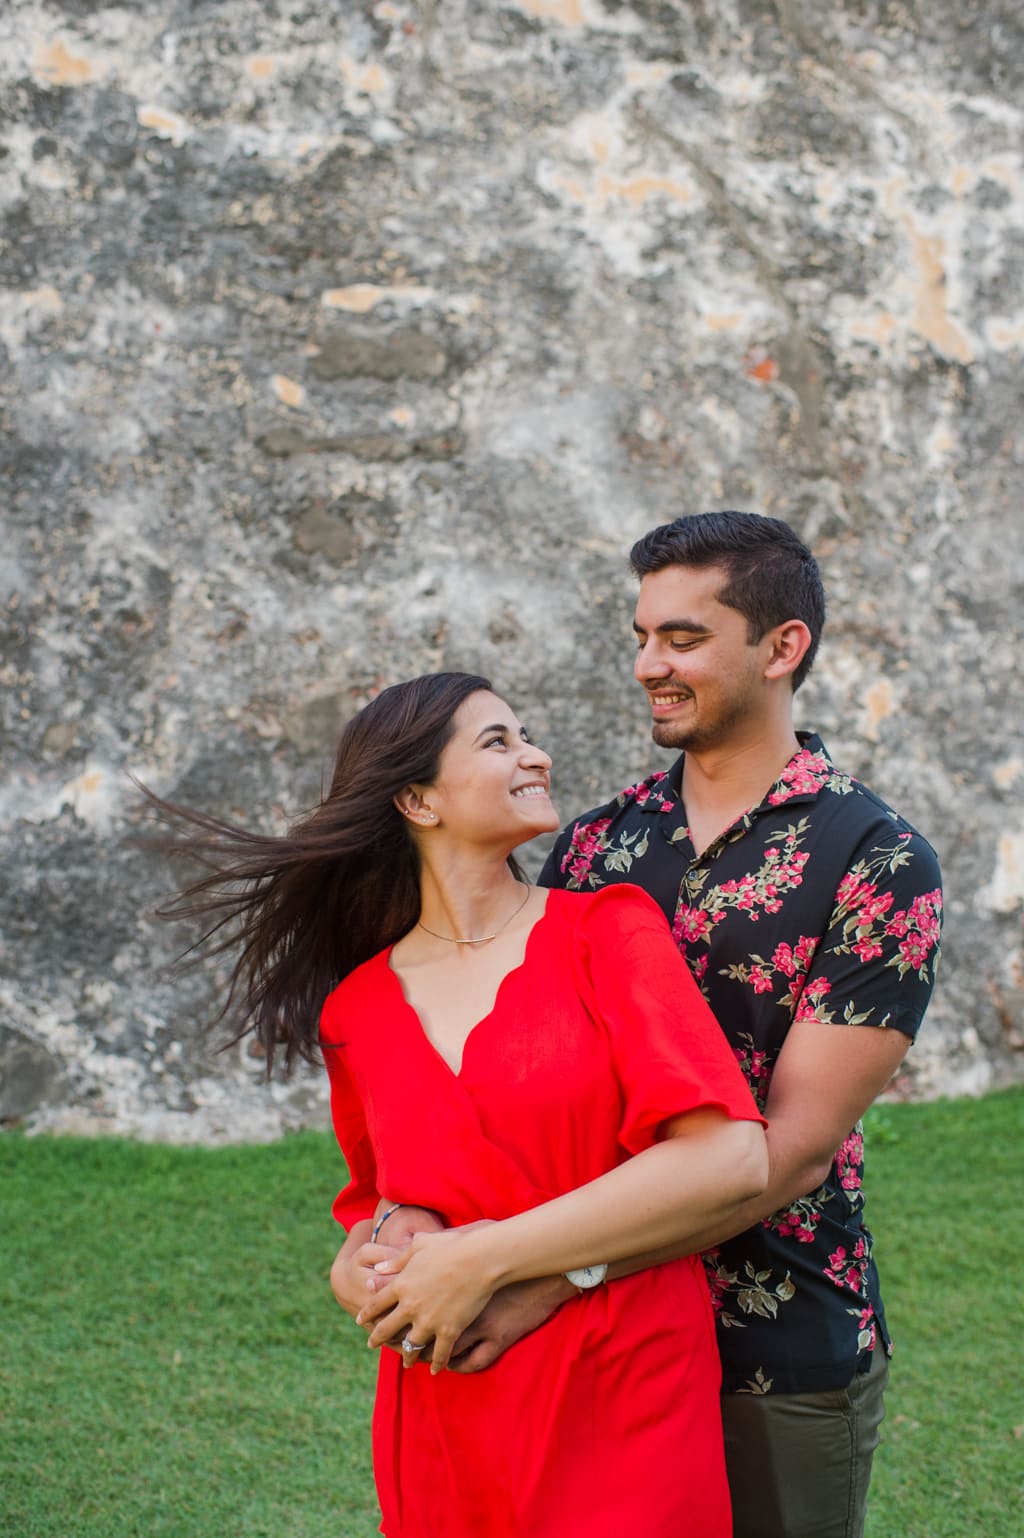 wedding photographer Camille Fontanez captures a marriage proposal at El Morro in Old San Juan, Puerto Rico